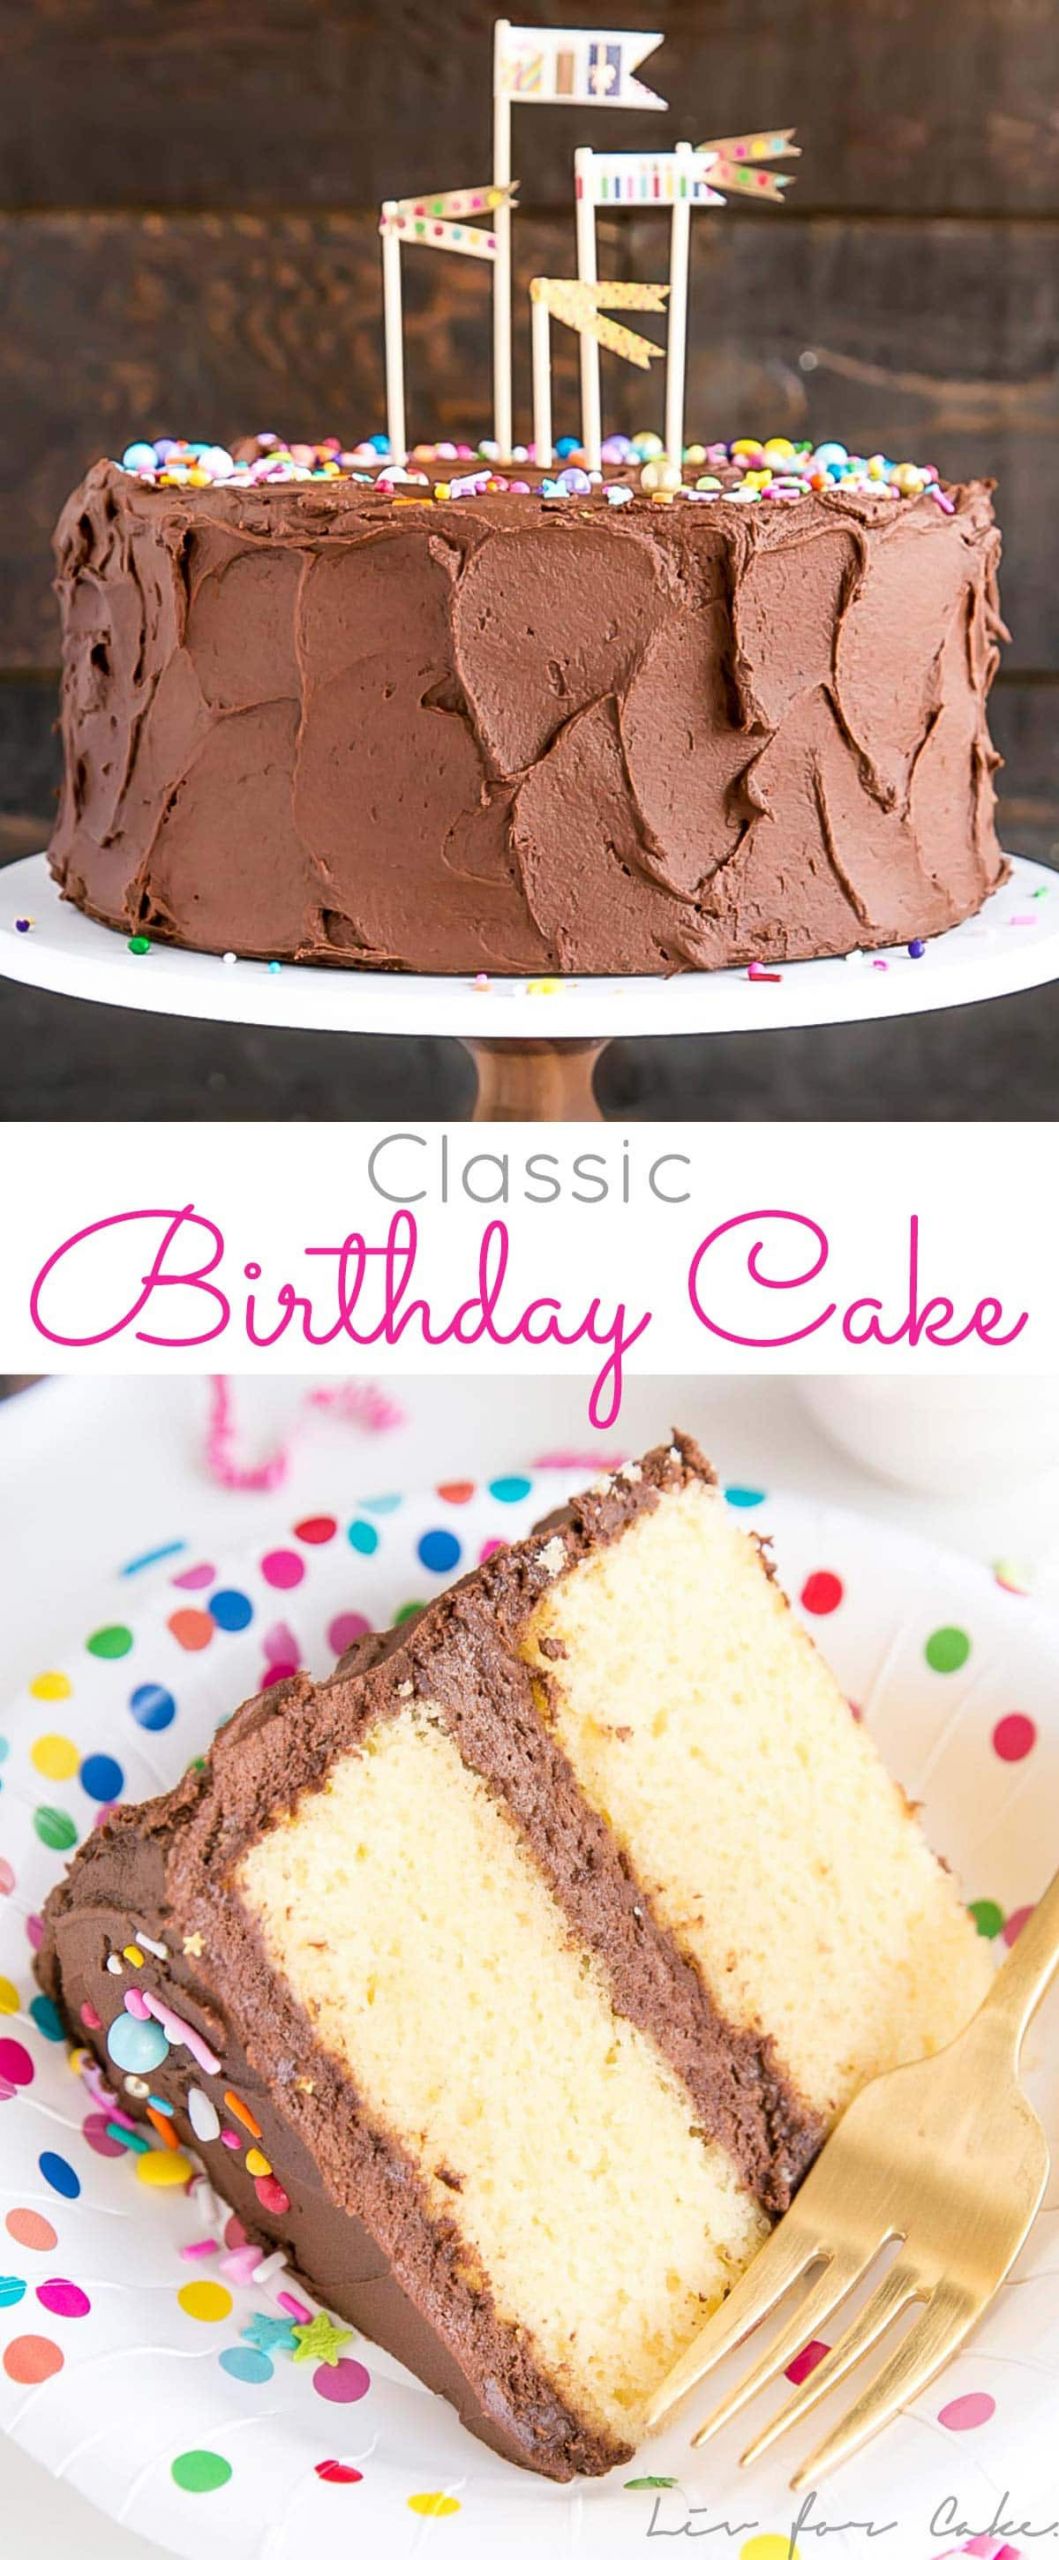 Yellow Birthday Cake Recipe
 The Best Ideas for Calories In Yellow Cake with Chocolate